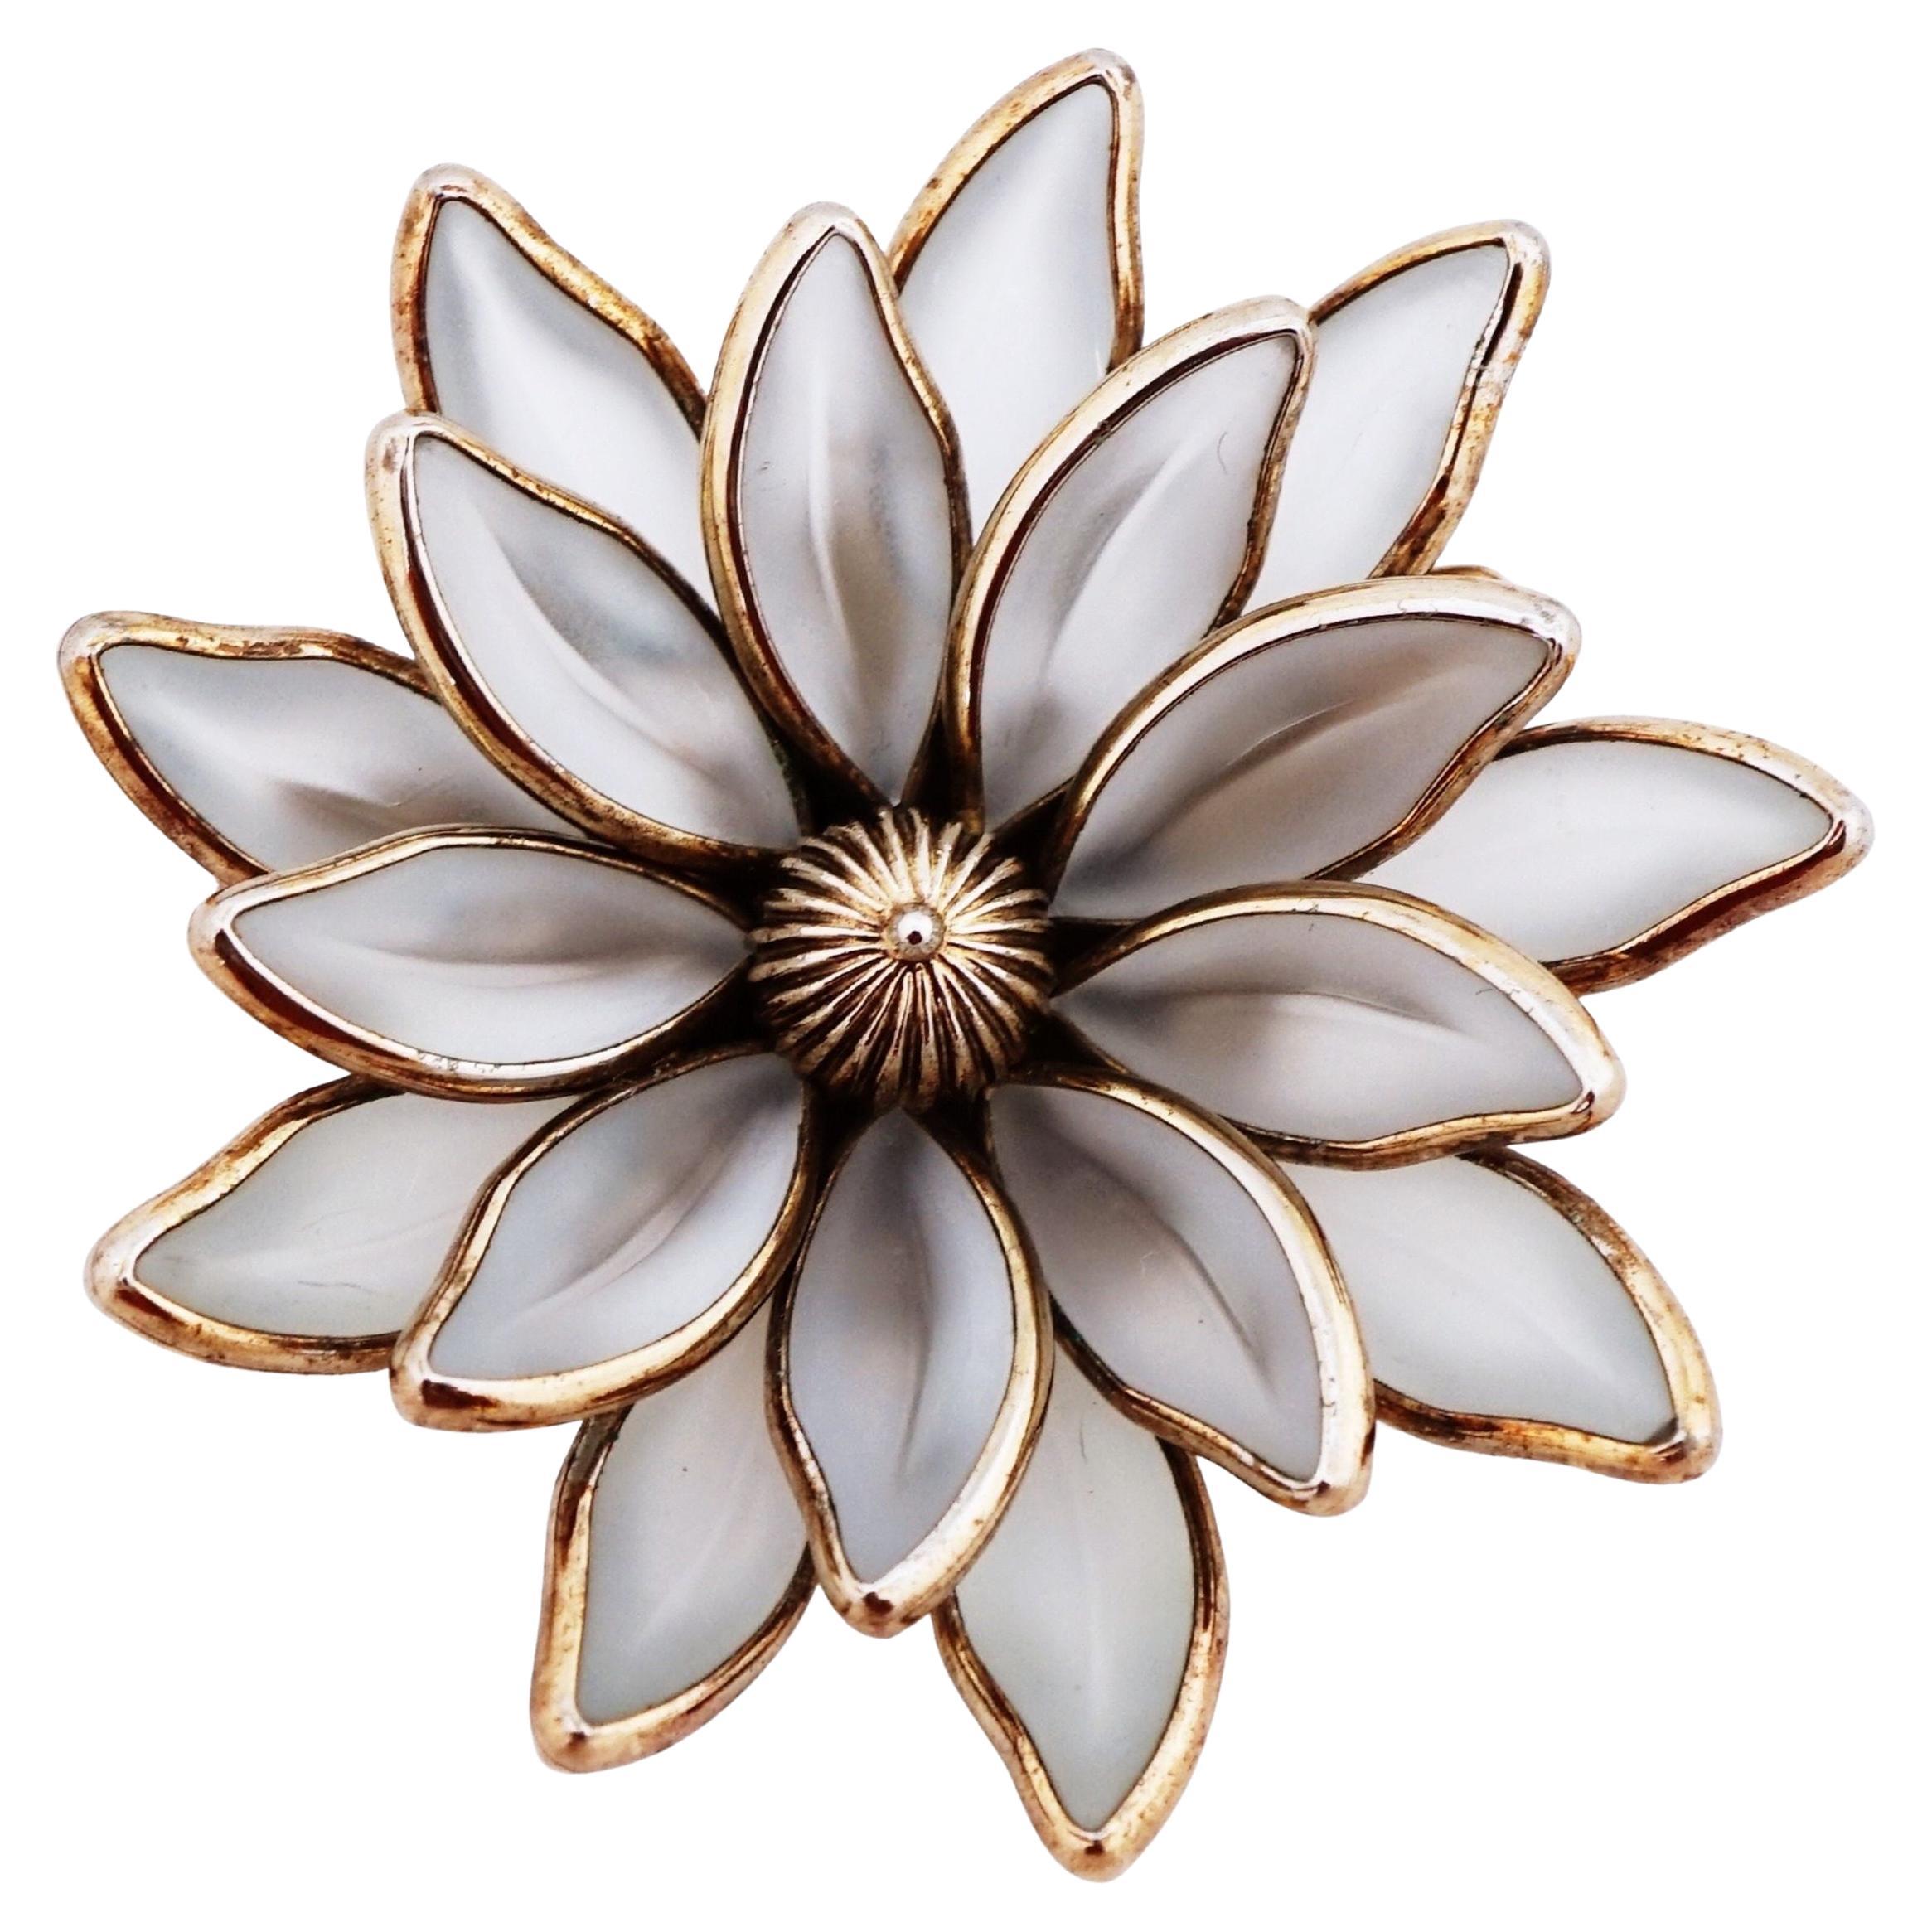 Layered Frosted Glass Flower Figural Brooch By Crown Trifari, 1950s